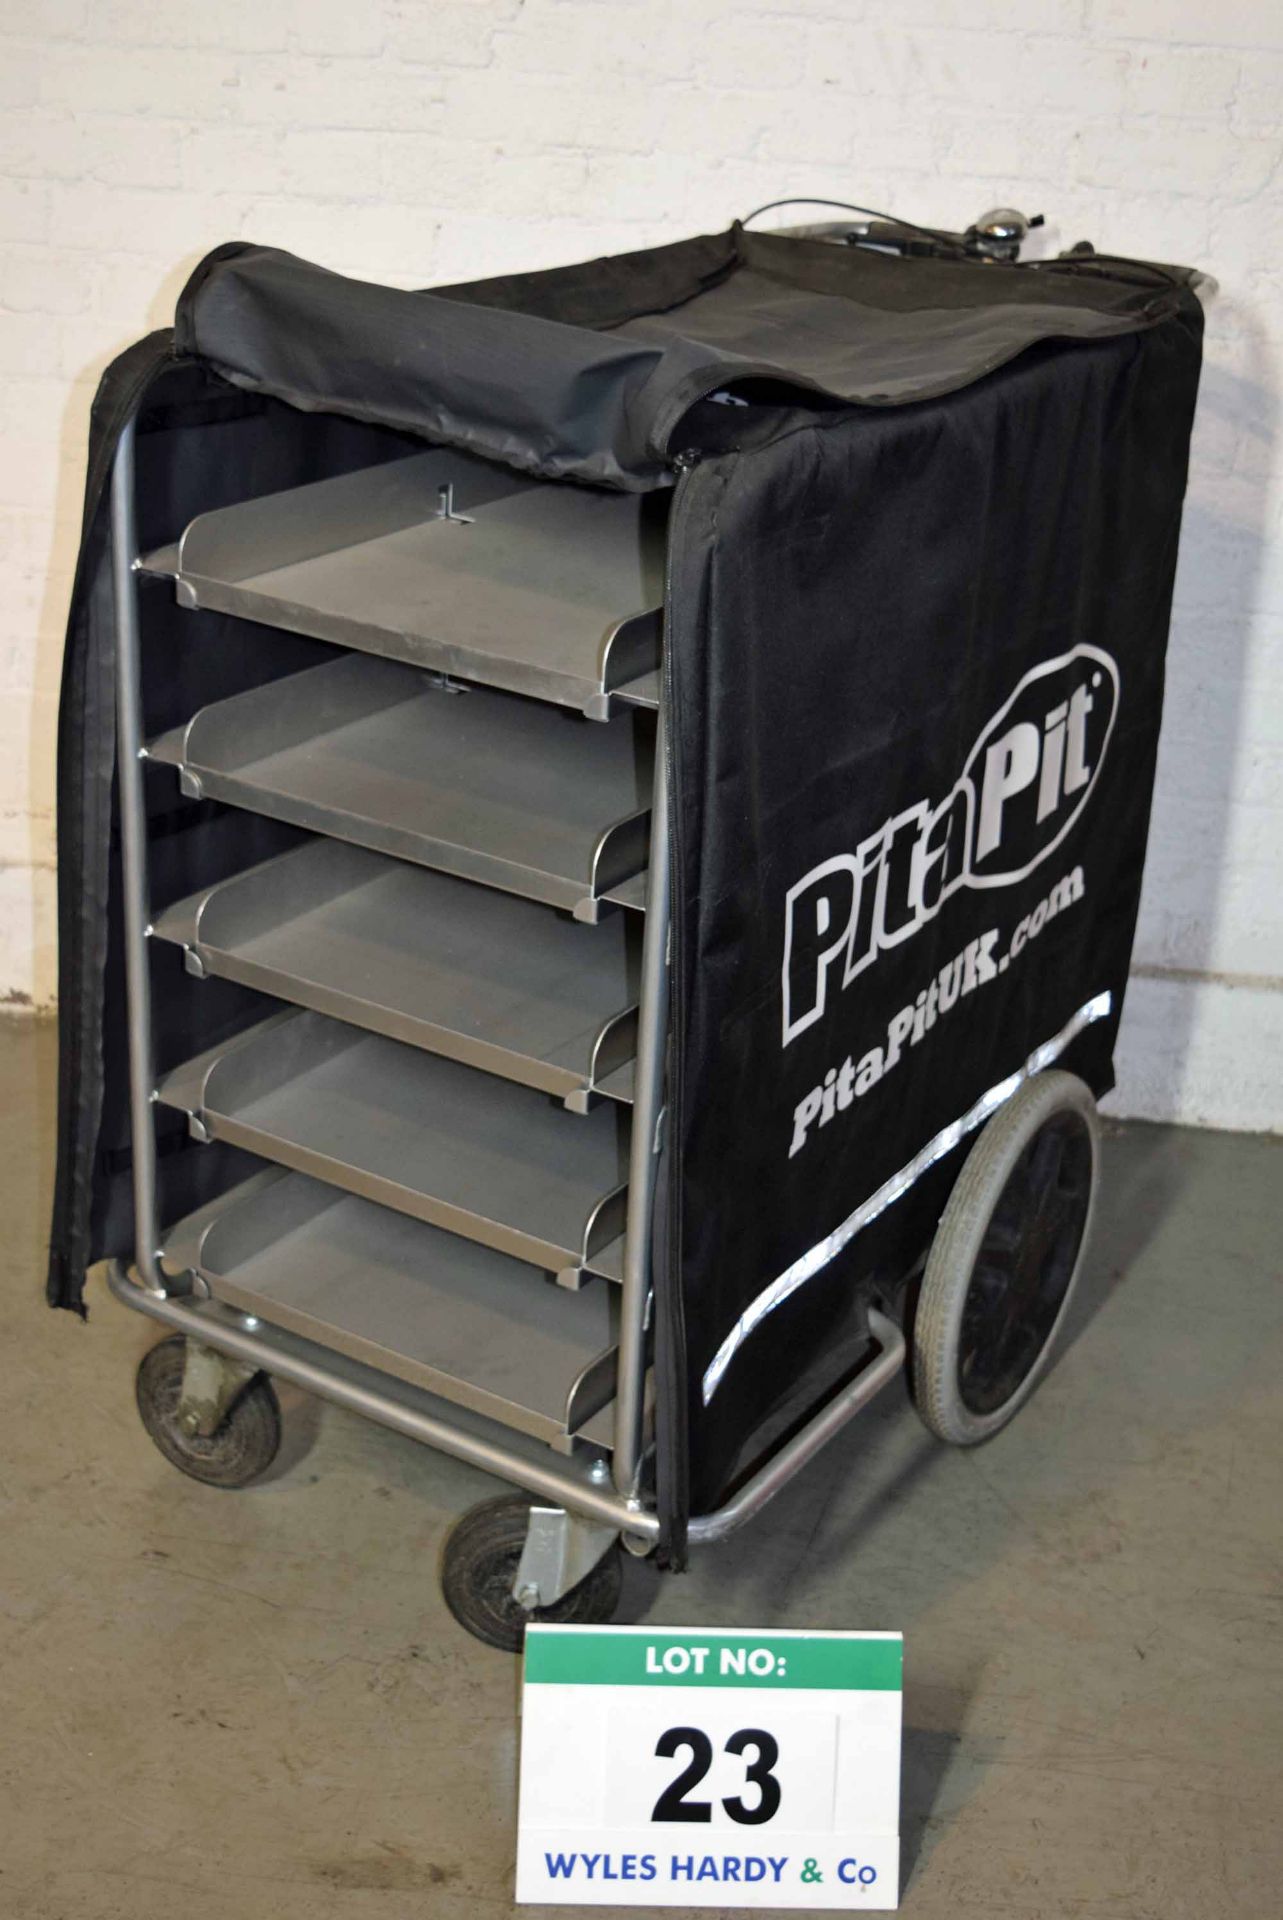 A Braked Pedestrian operated Delivery Trolley with Five Platter Trays & A Bespoke Zipped Cover